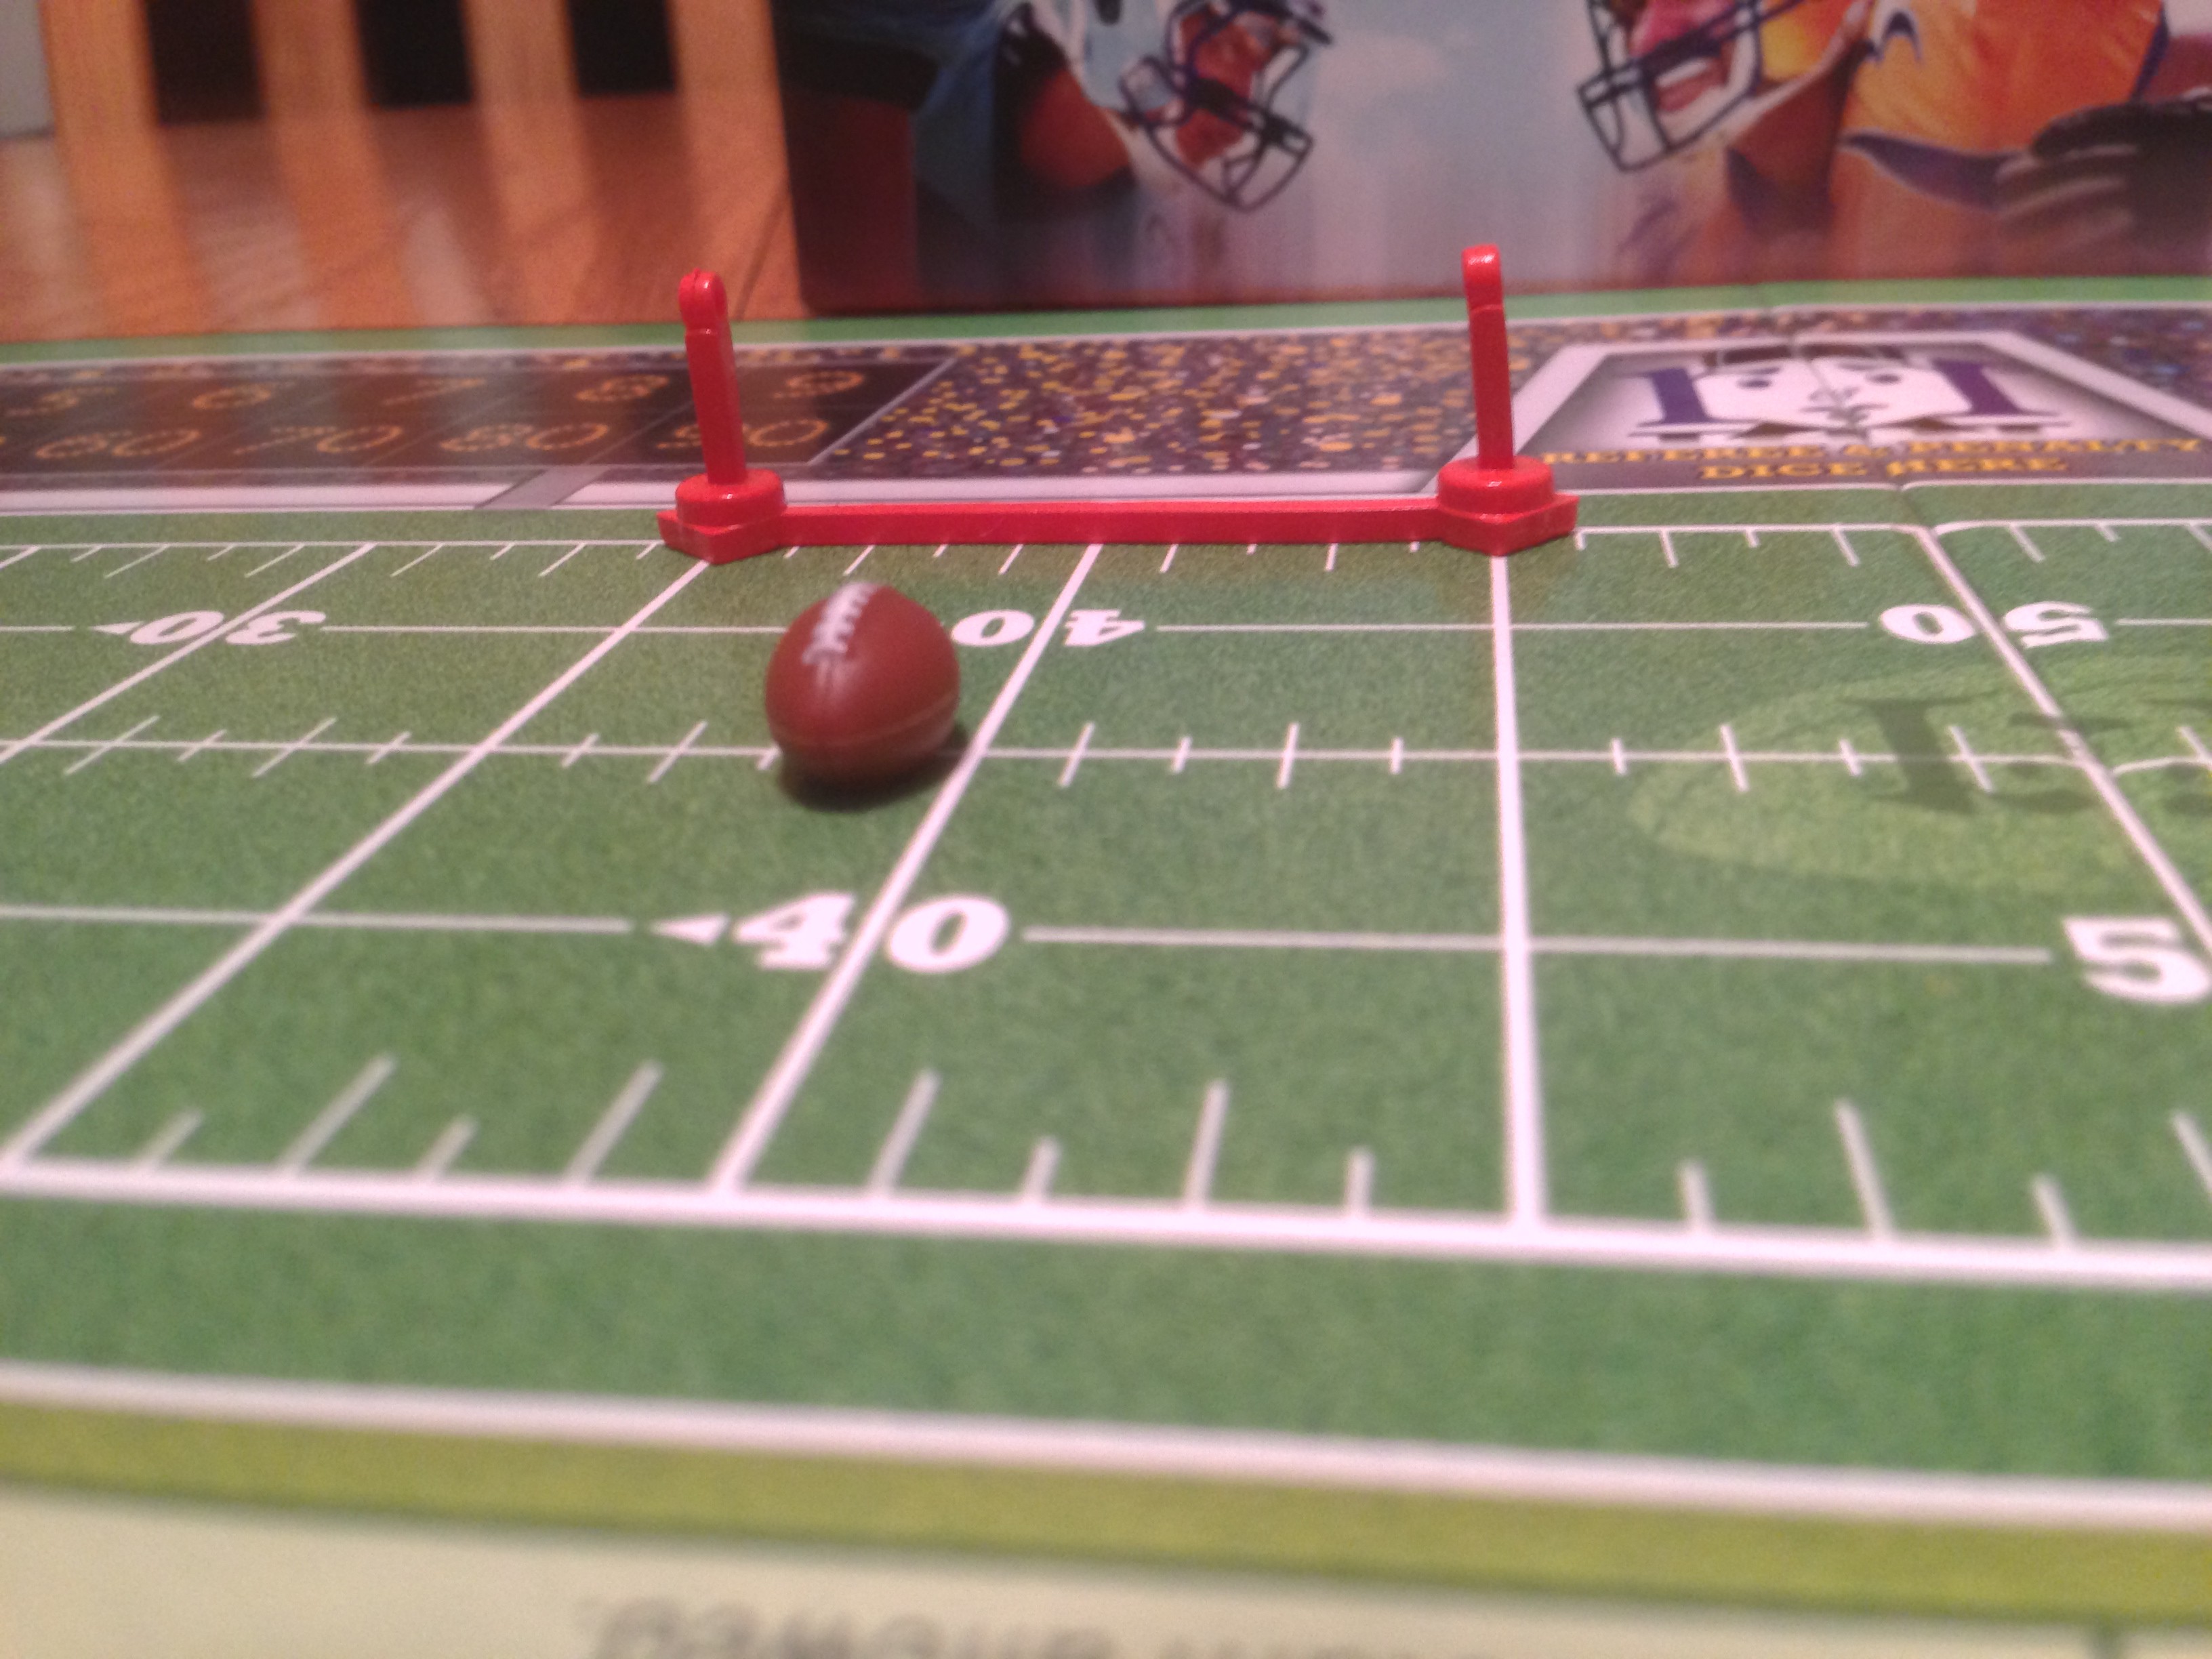 Closeup of football and down markers